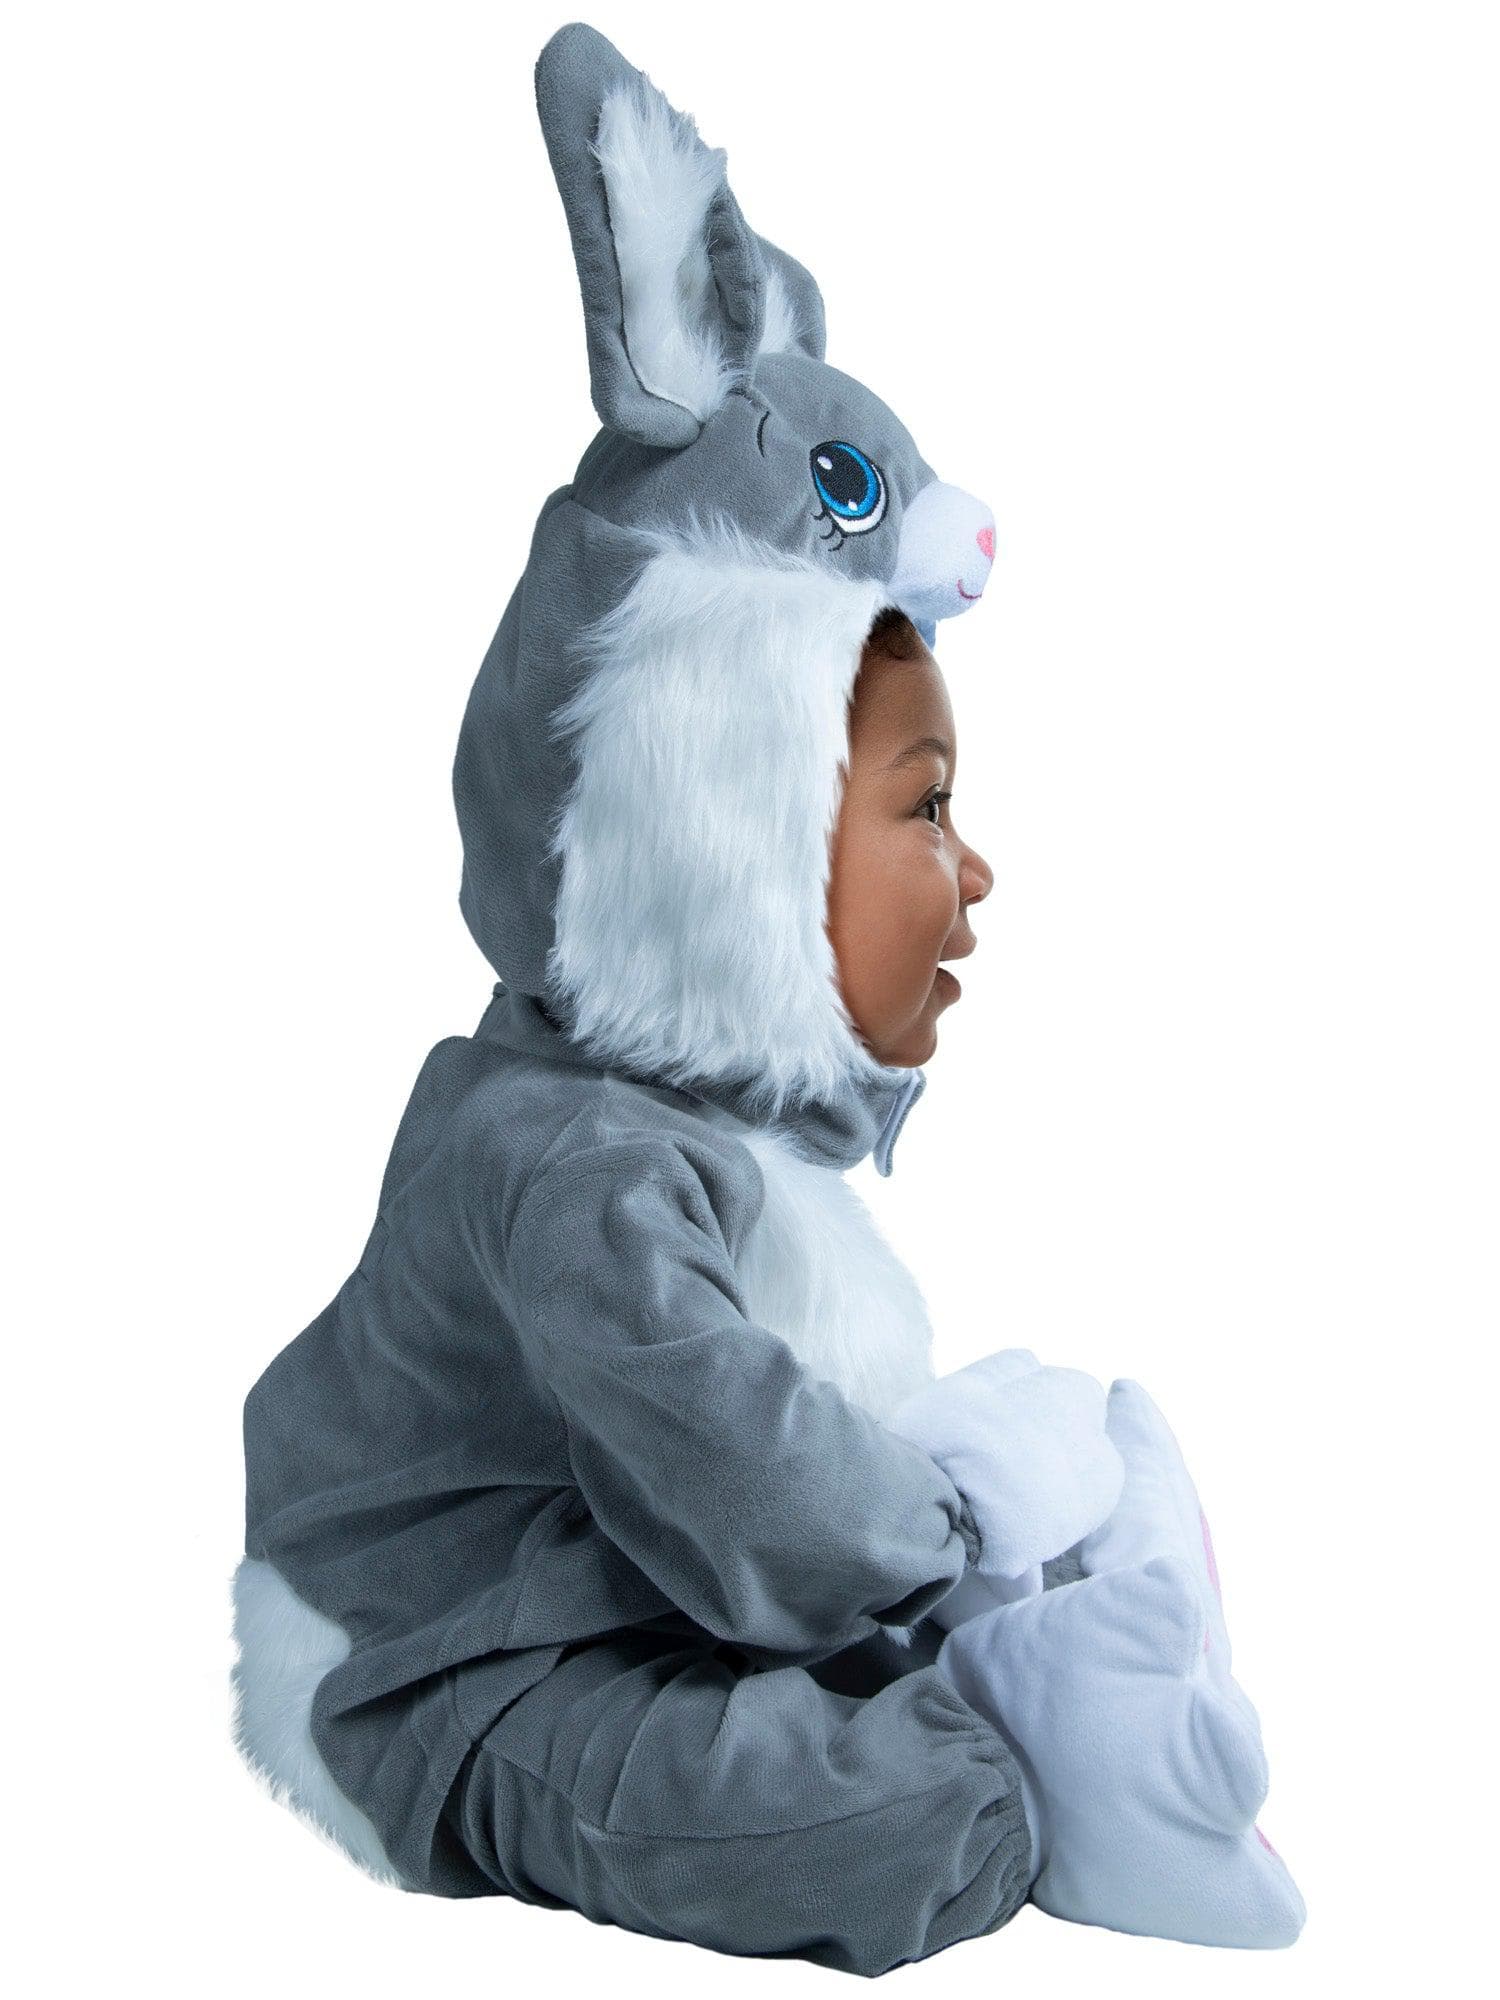 Gray Fluffy Bunny Costume for Babies and Toddlers - costumes.com